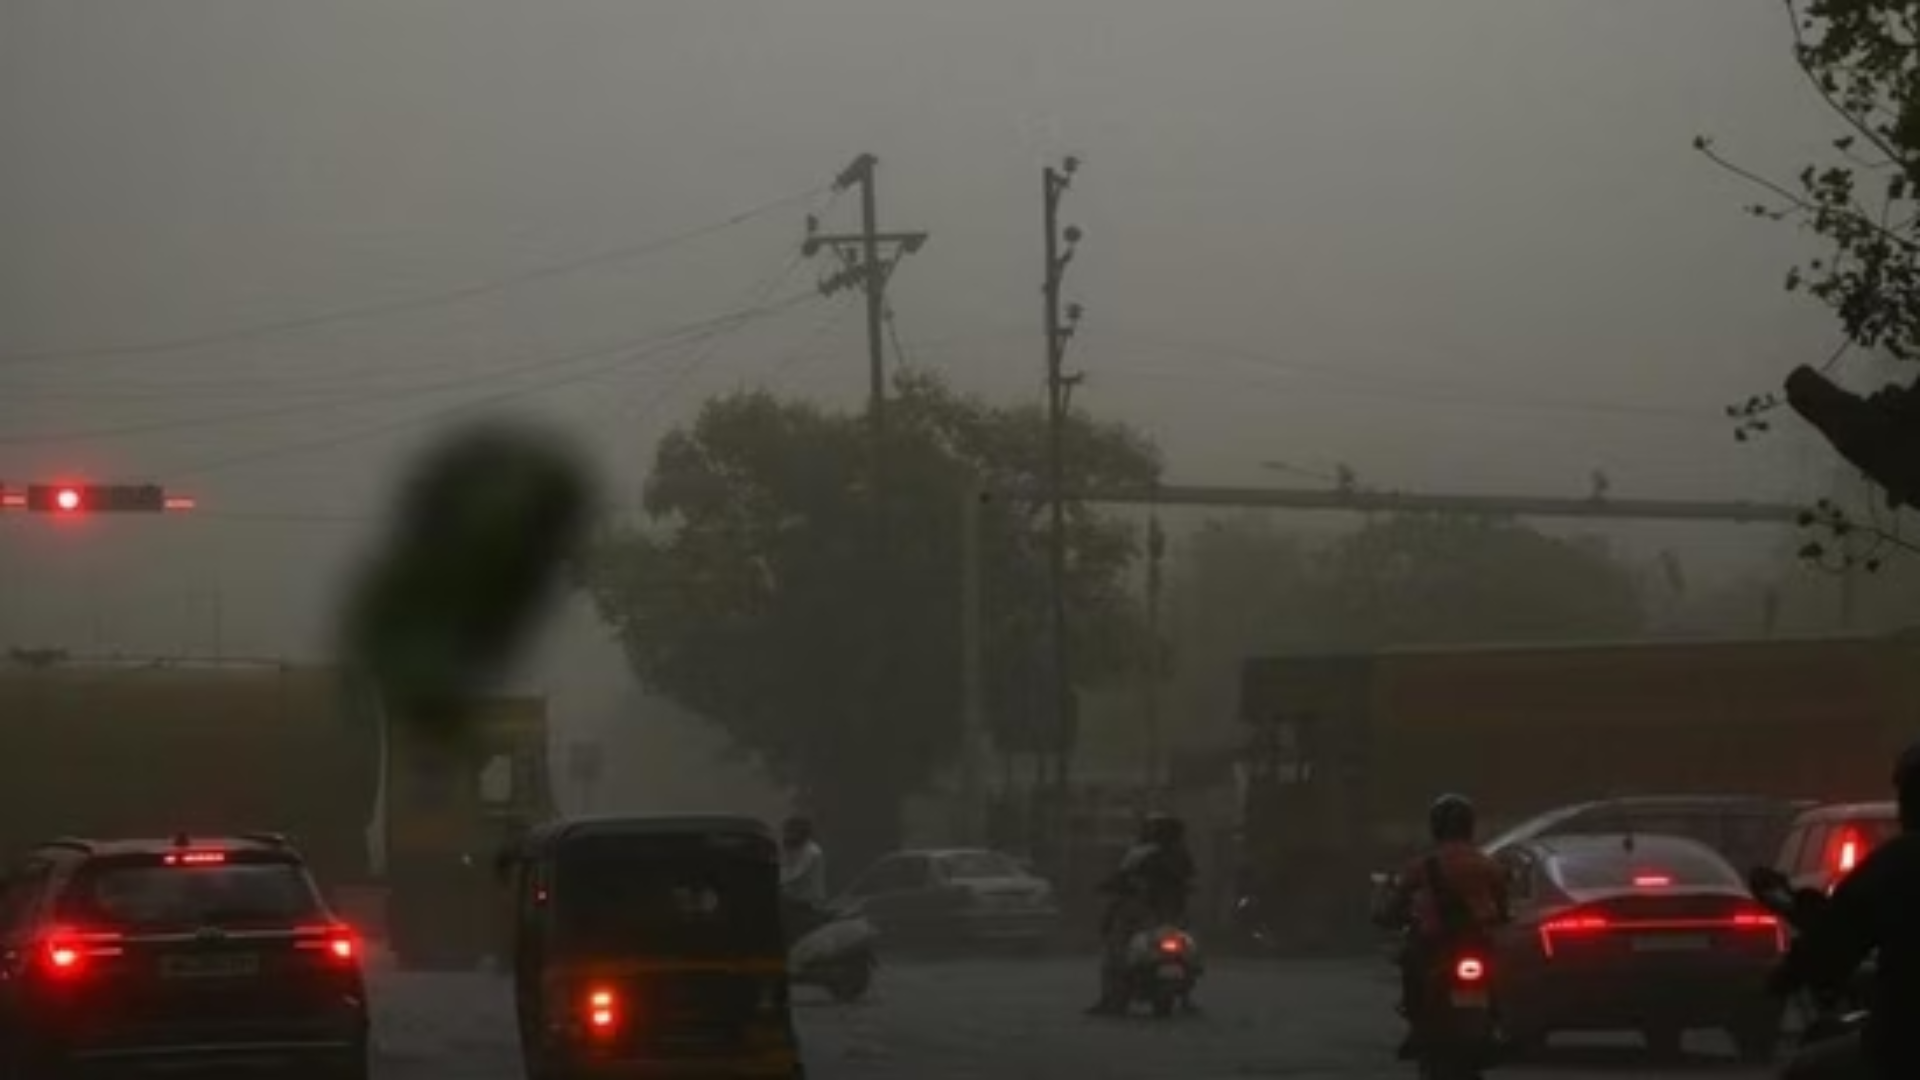 Mumbai Weather: IMD Issues Alert Strong Winds, Rain Expected In The Next 3-4 Hours